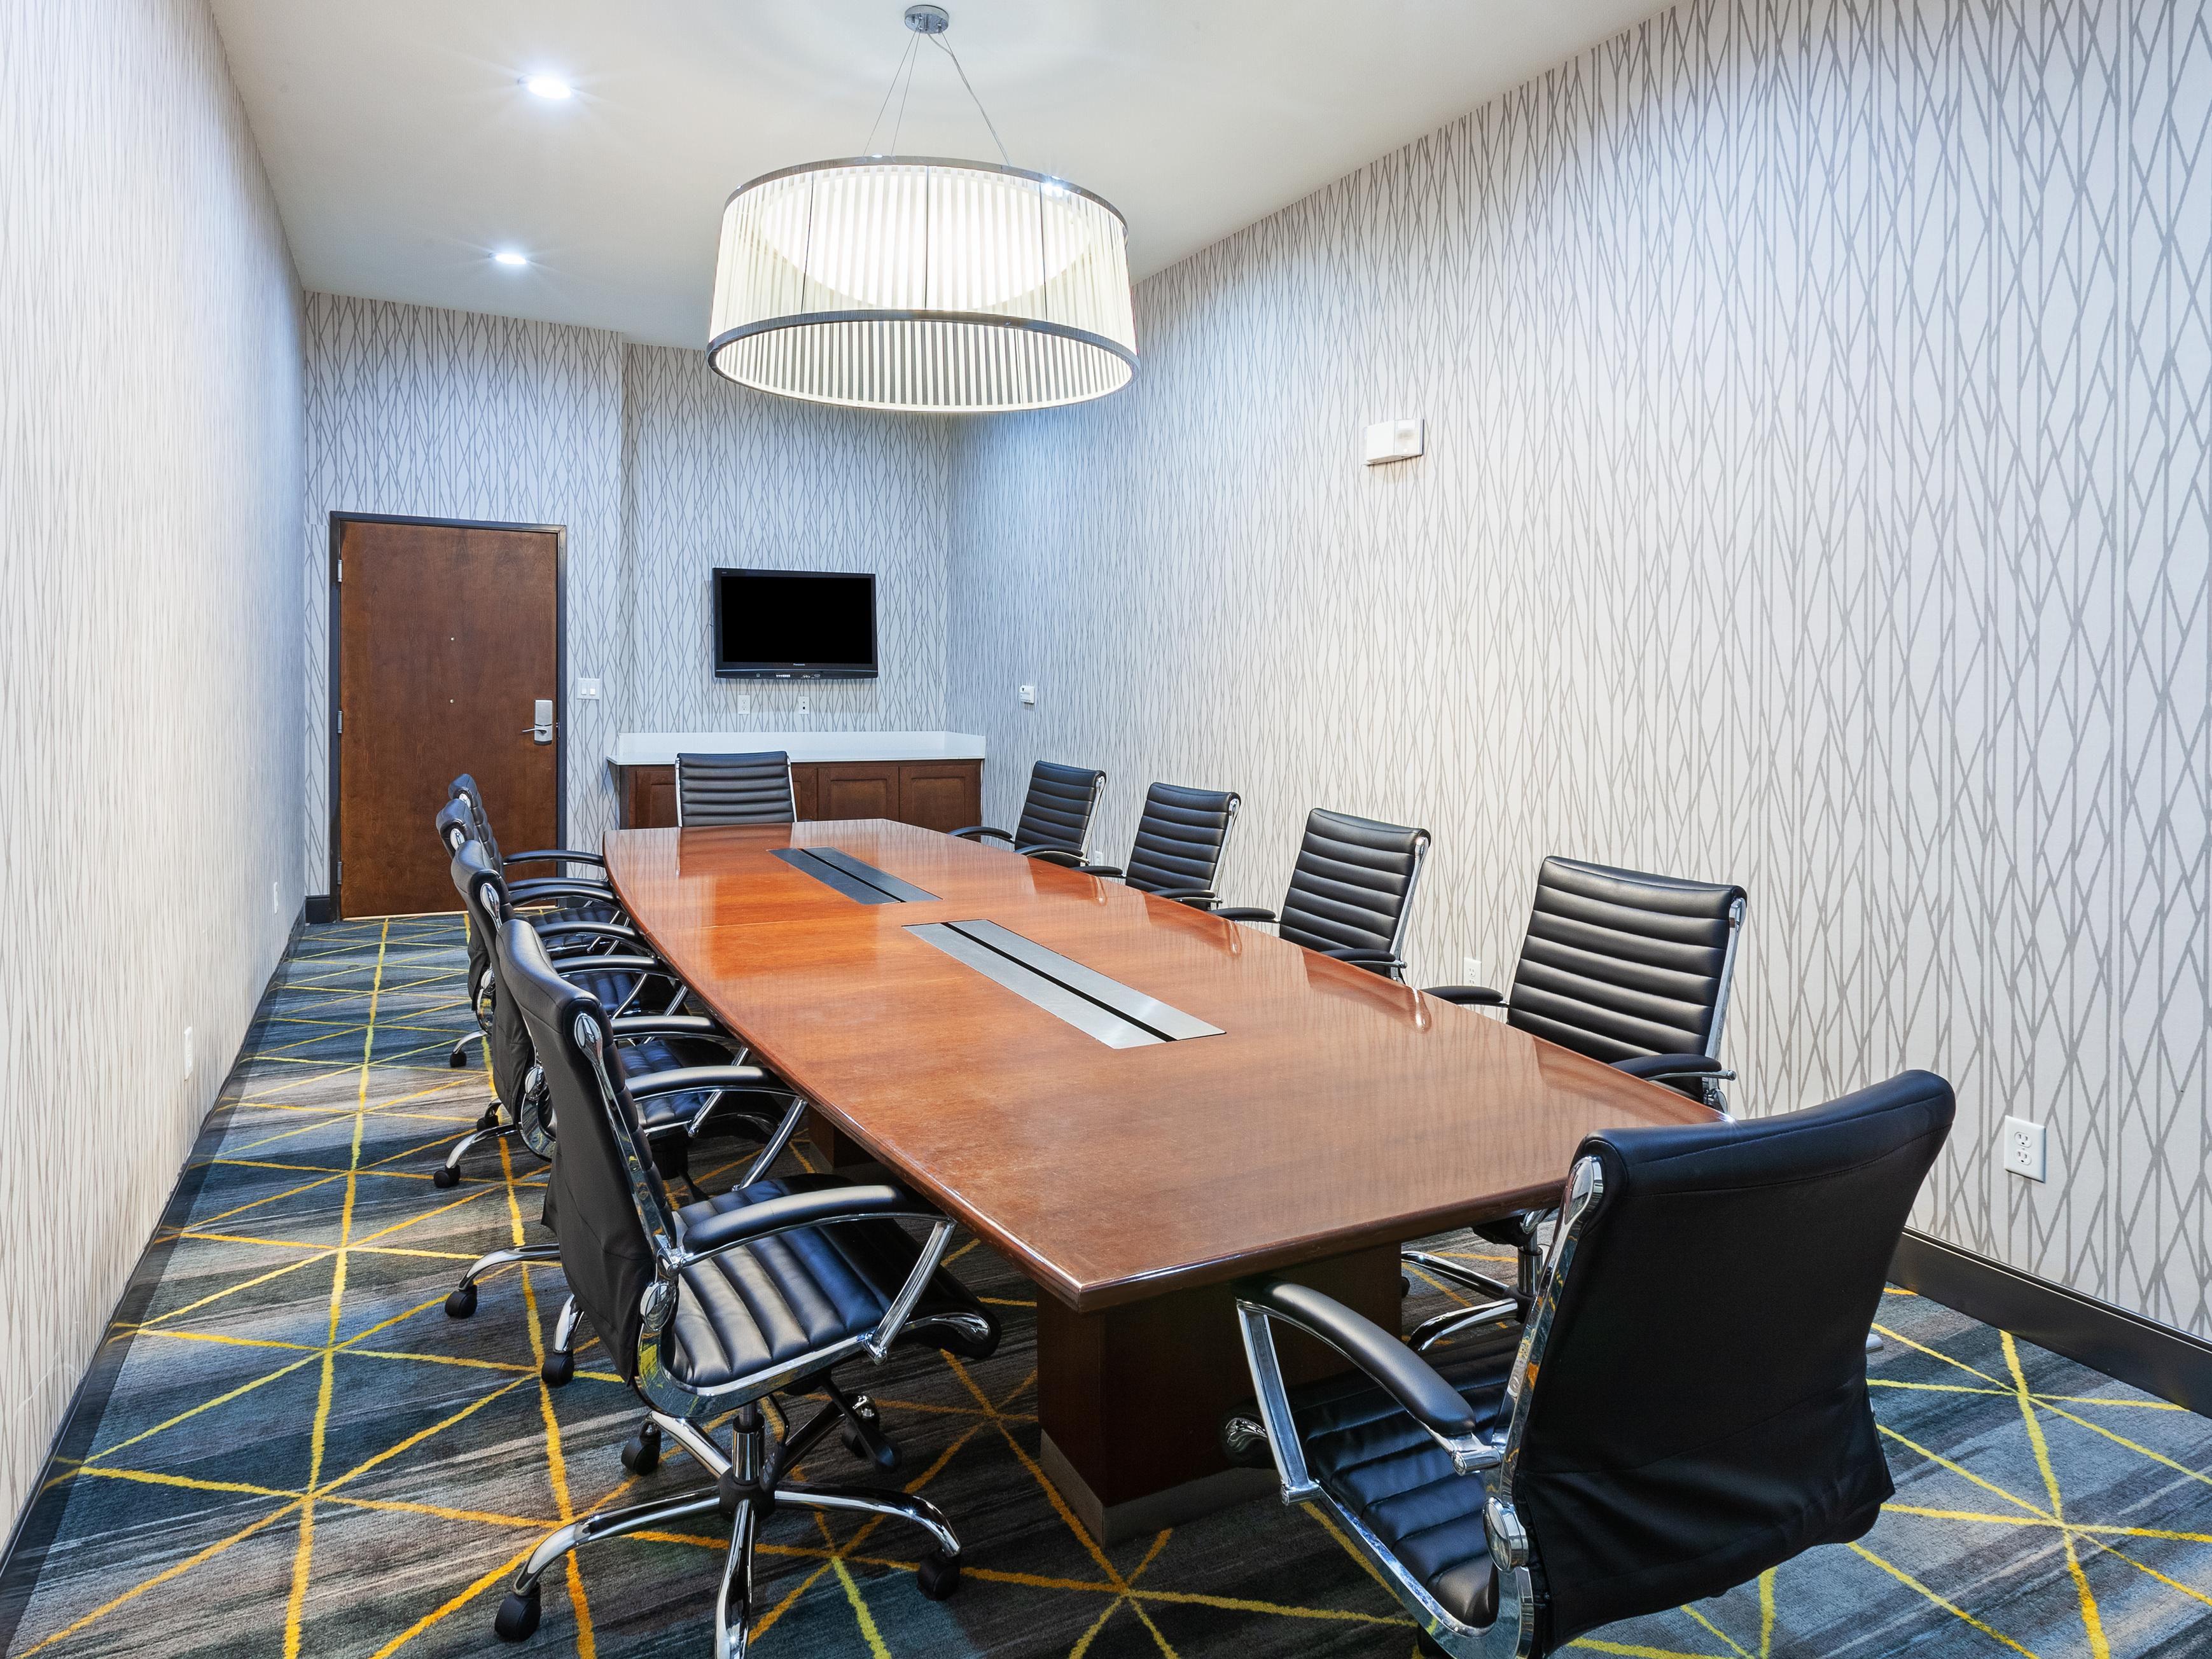 Our Executive Boardroom is a favorite for intimate corporate meetings or company interviews, with complimentary wireless internet and seating for up to 10 attendees. Audio/Visual equipment rental available. For pricing and availability, contact Sales at (214) 250-5057, or at yareny@ascendgrowth.com. 